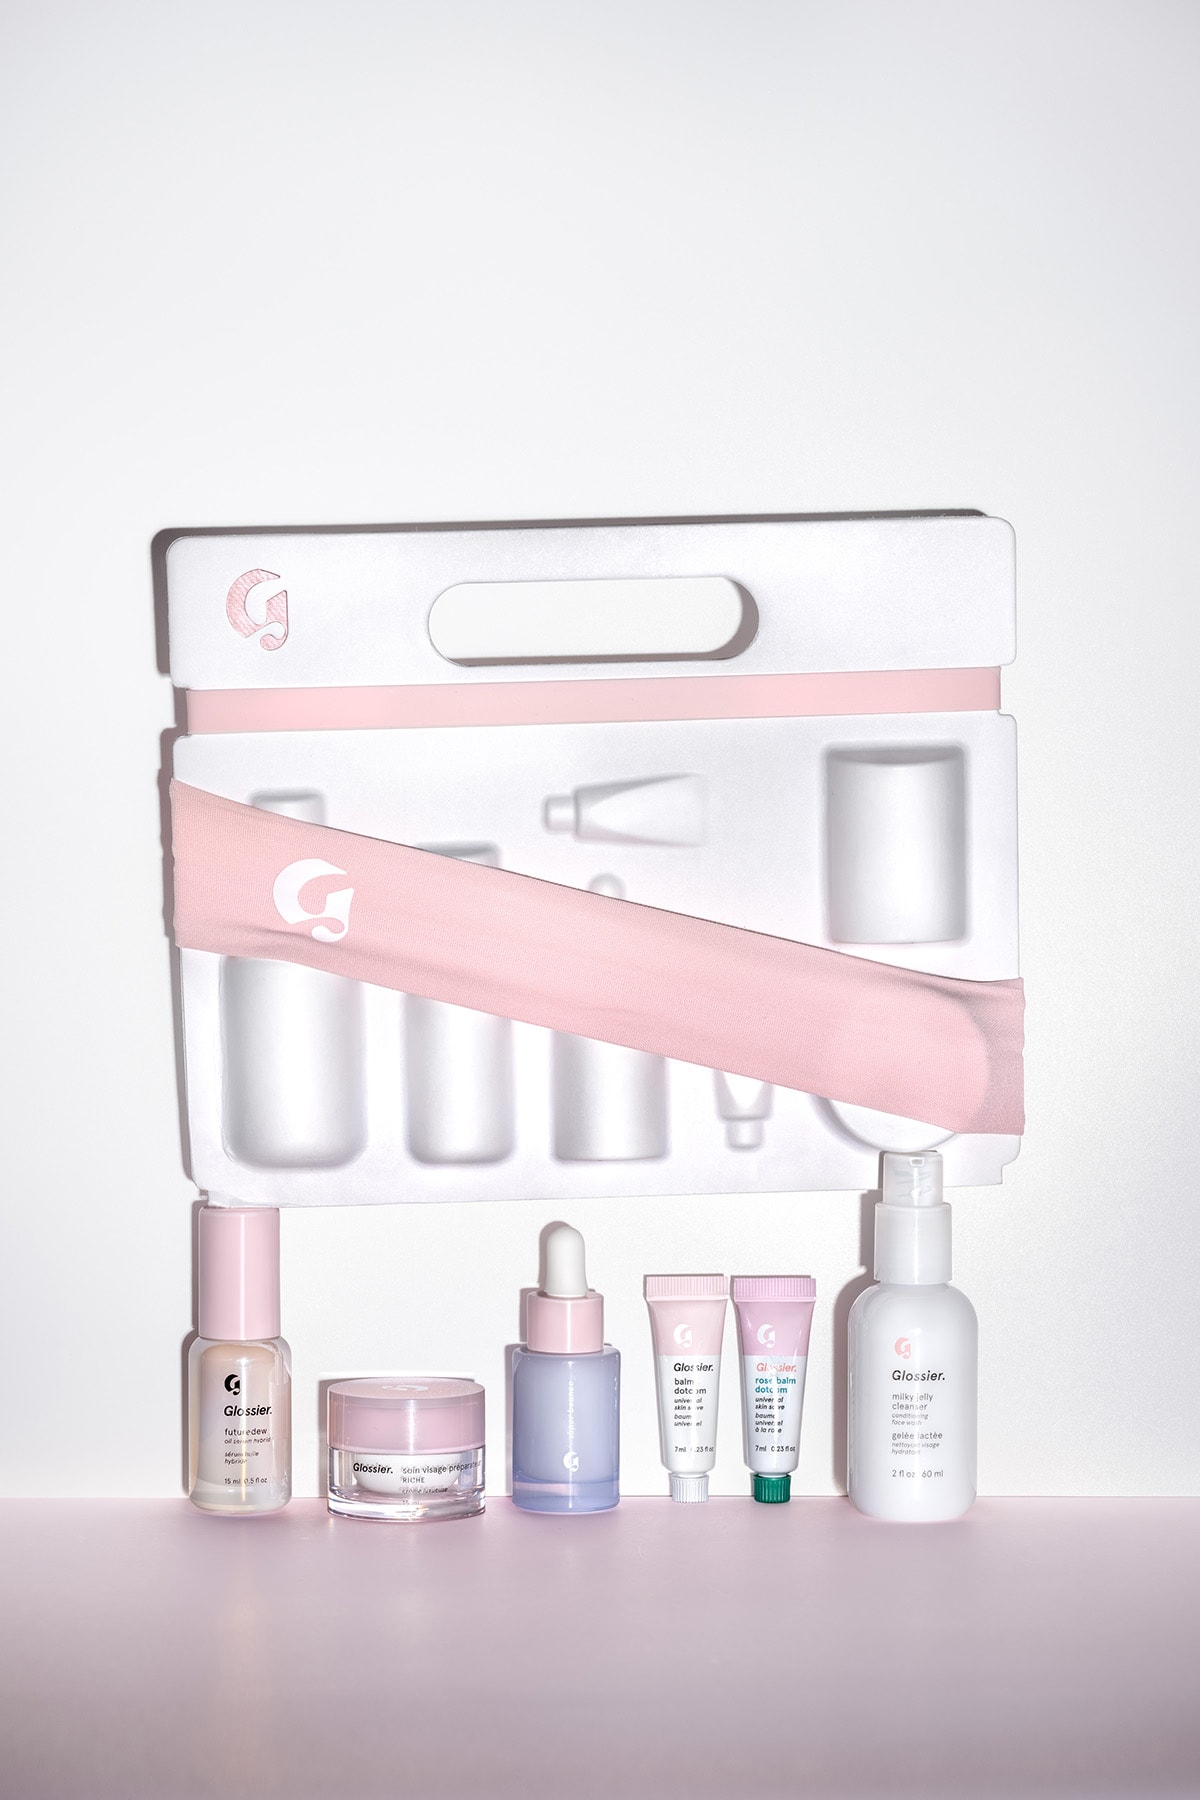 Glossier The Skincare Edit Products